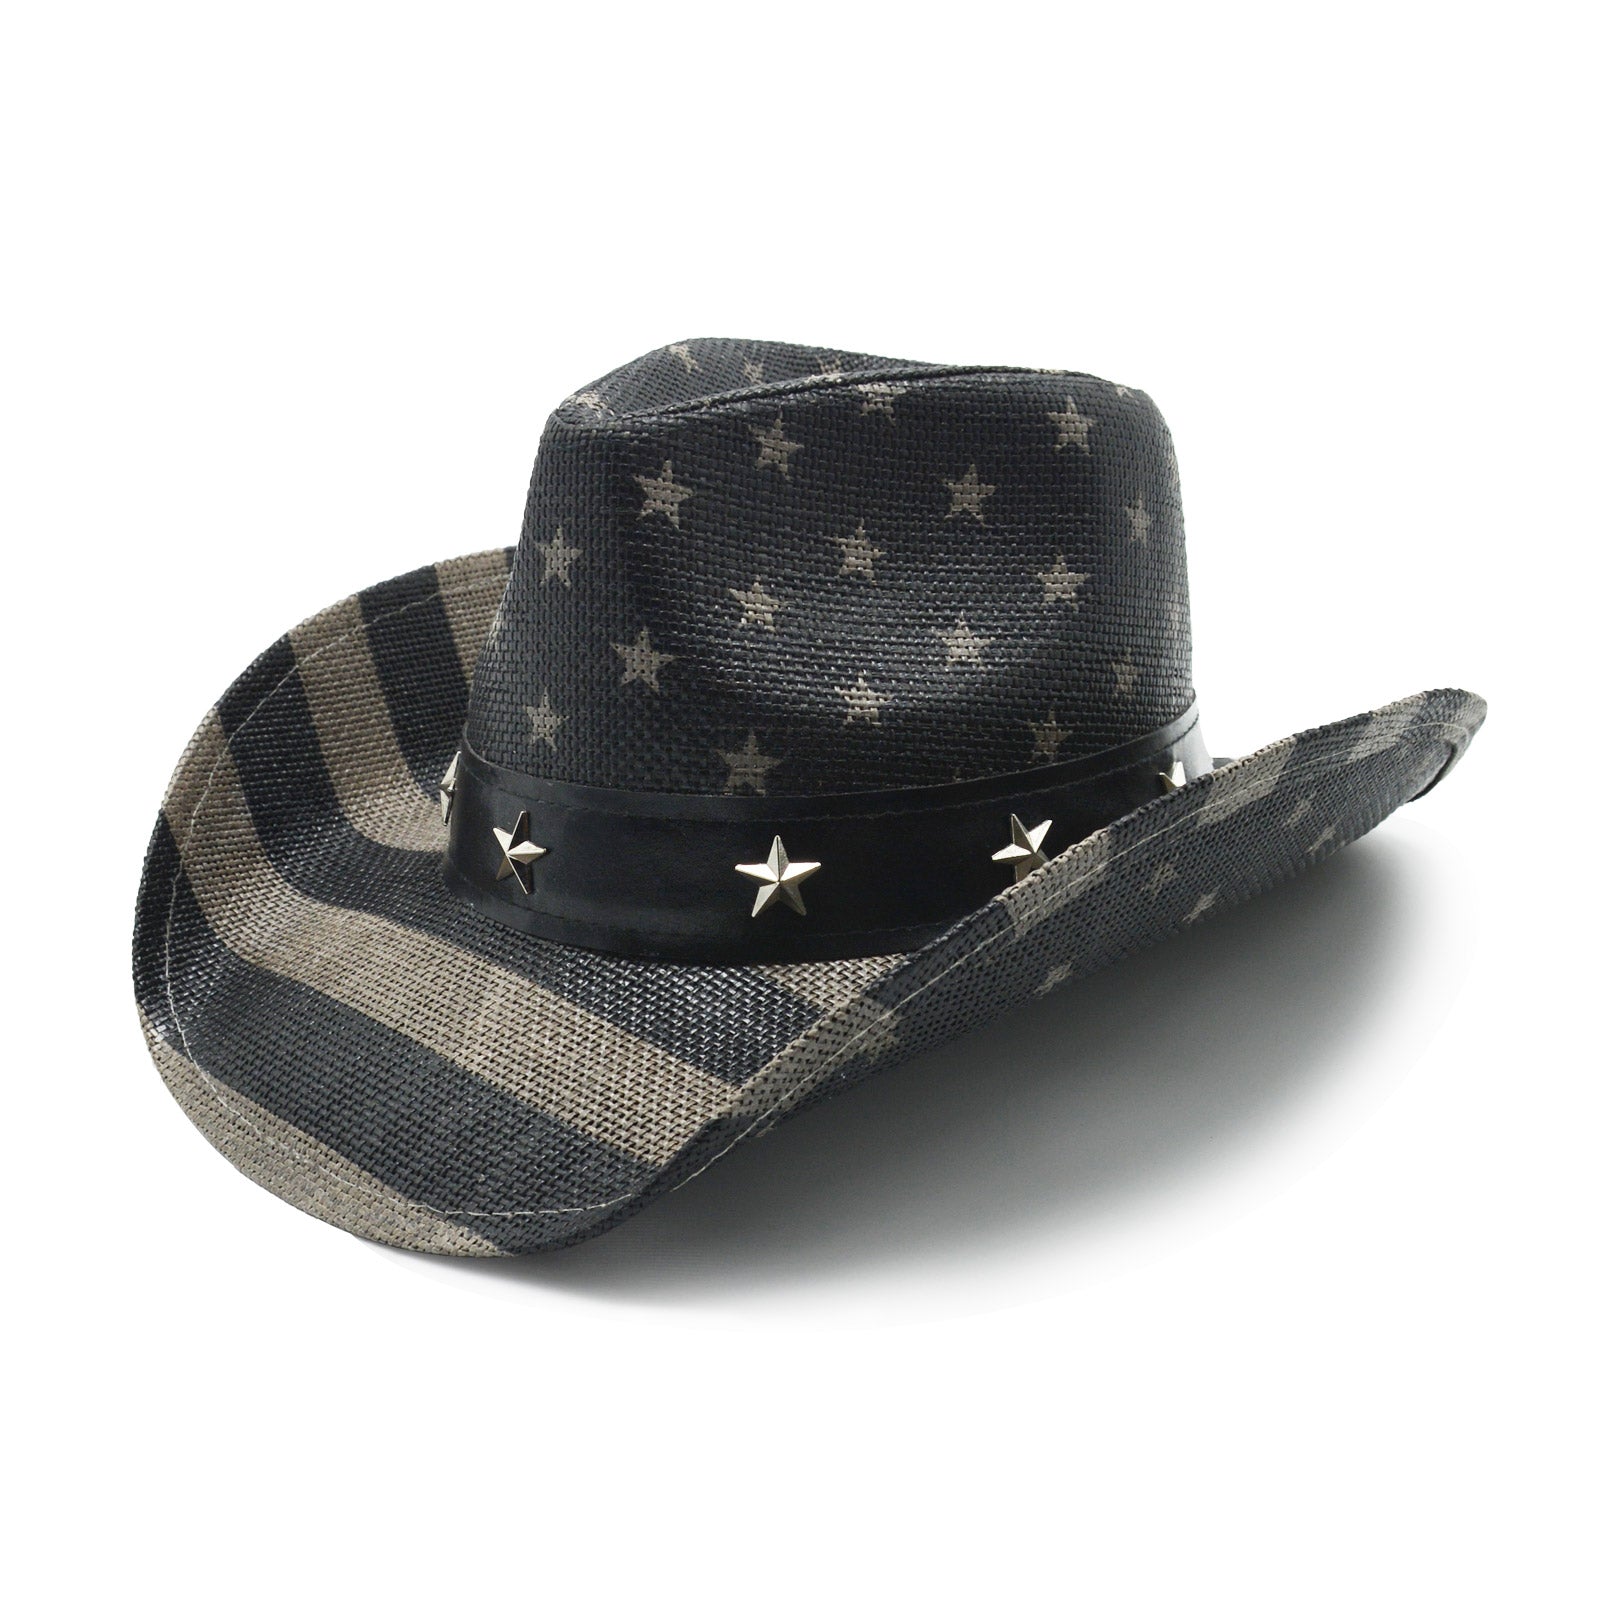 Fluffy Sense Vintage USA American Flag Cowboy Hat Classic Western Style Cowboy Cowgirl Hat (Classic Black and White)